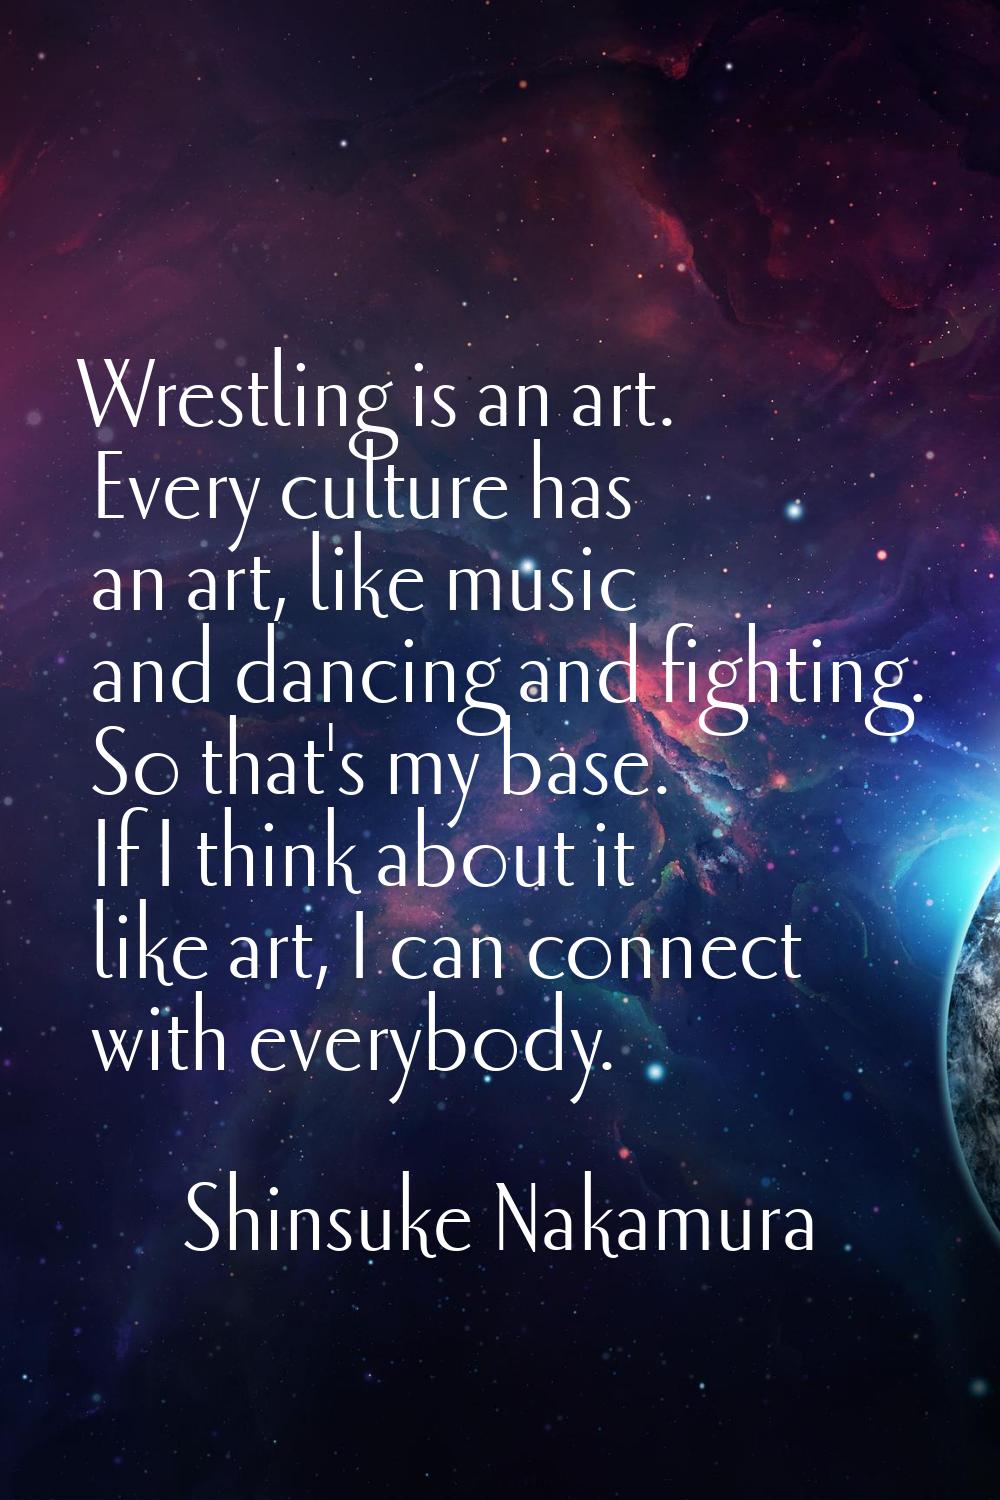 Wrestling is an art. Every culture has an art, like music and dancing and fighting. So that's my ba